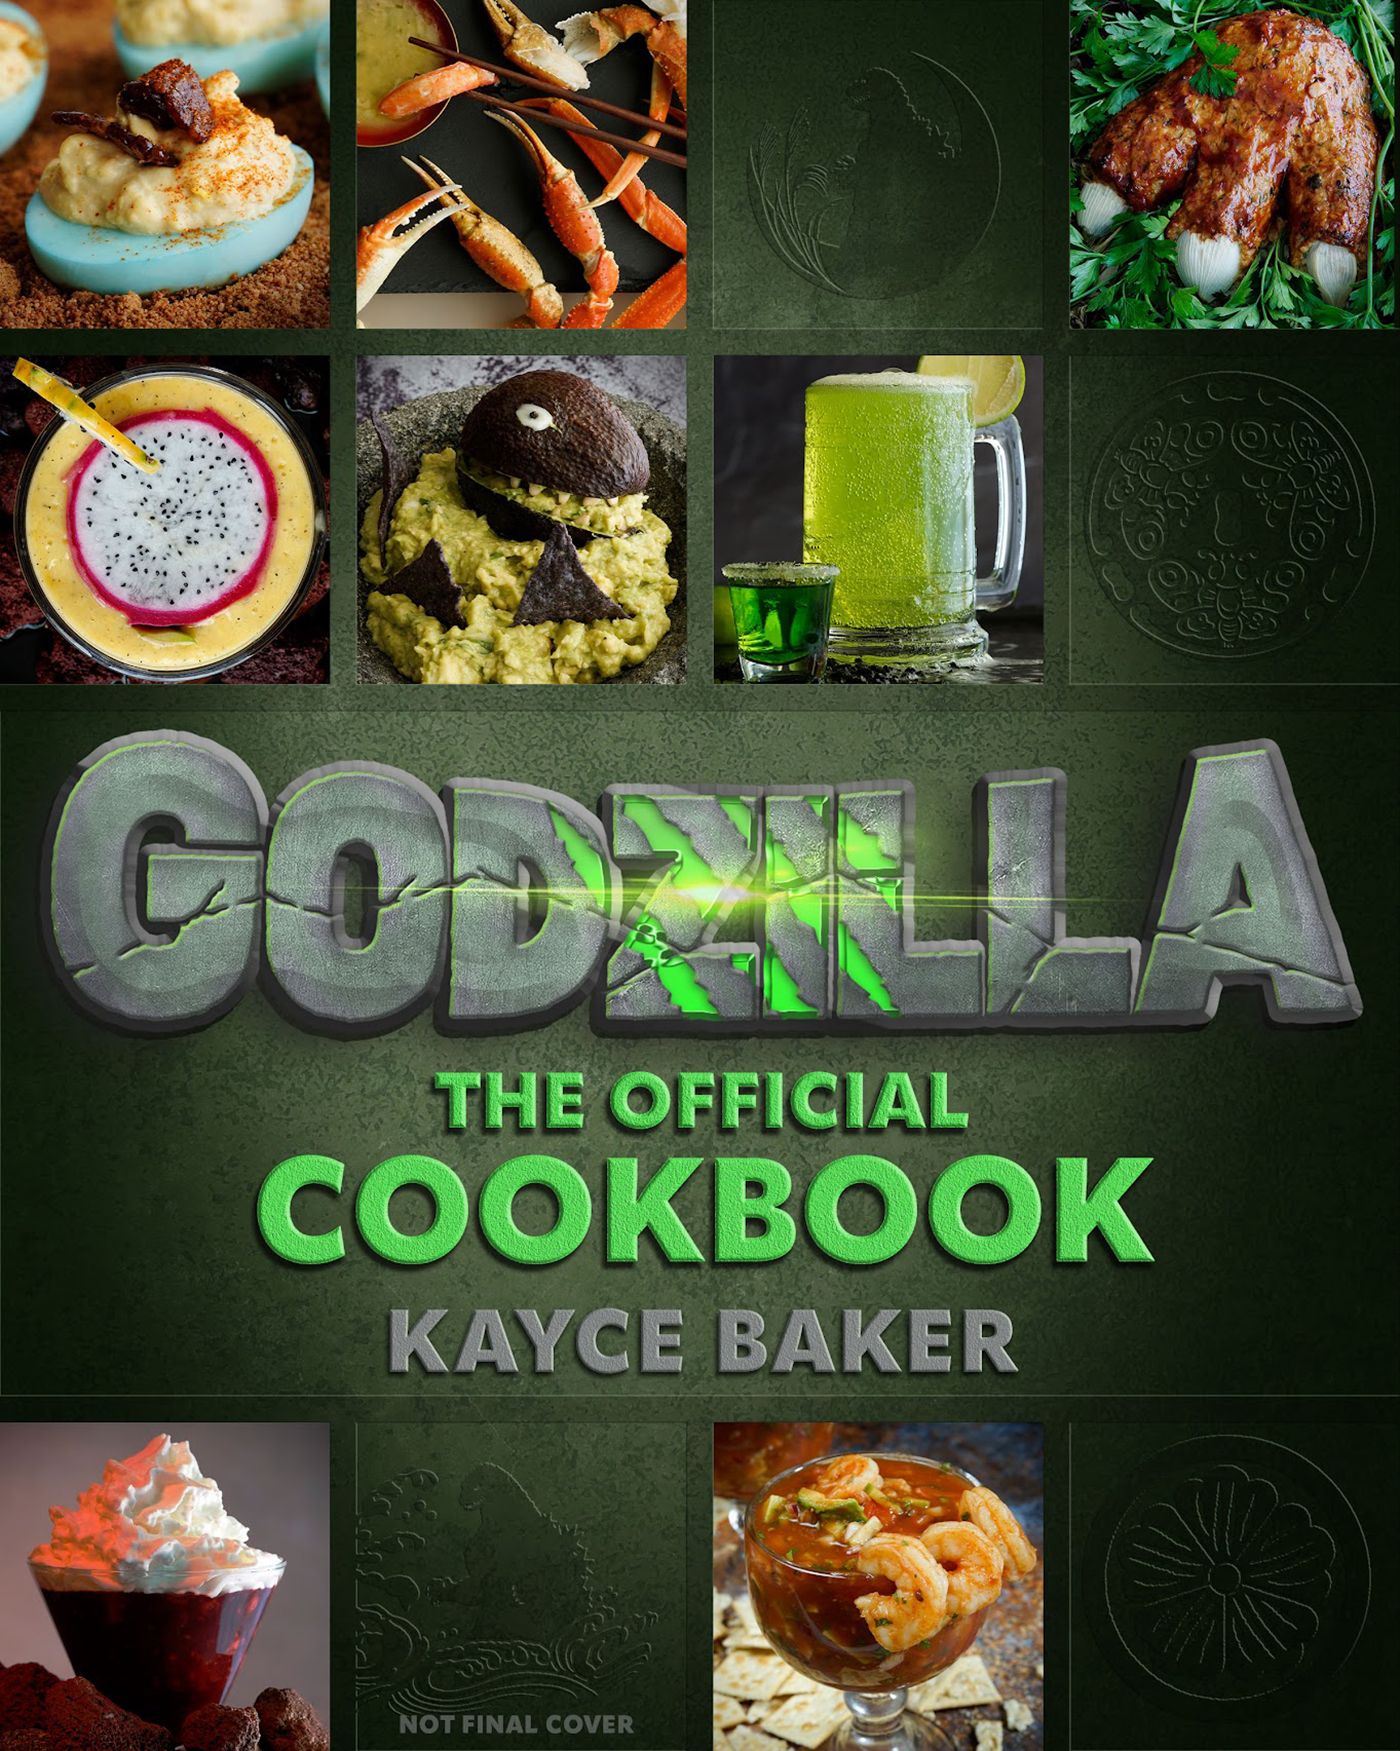 Godzilla Cookbook With “Meaty Creations”, Unique Drinks & Vegan Options Revealed For 70th Anniversary [EXCLUSIVE]